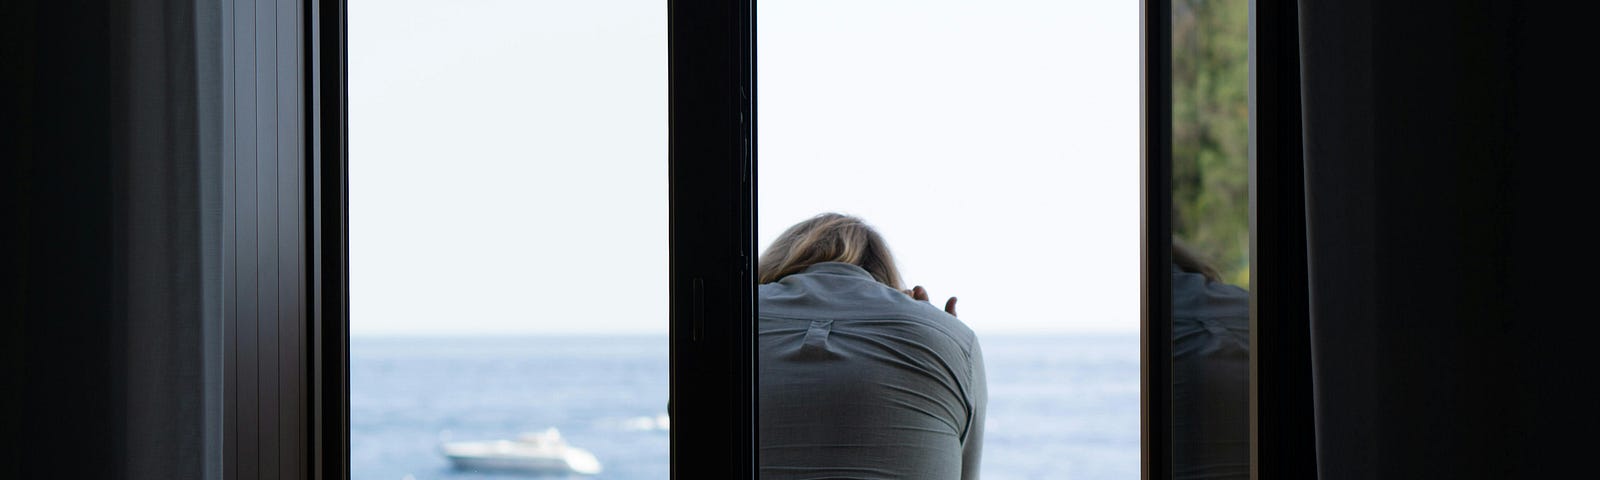 A woman standing on the balcony looks out at the ocean.